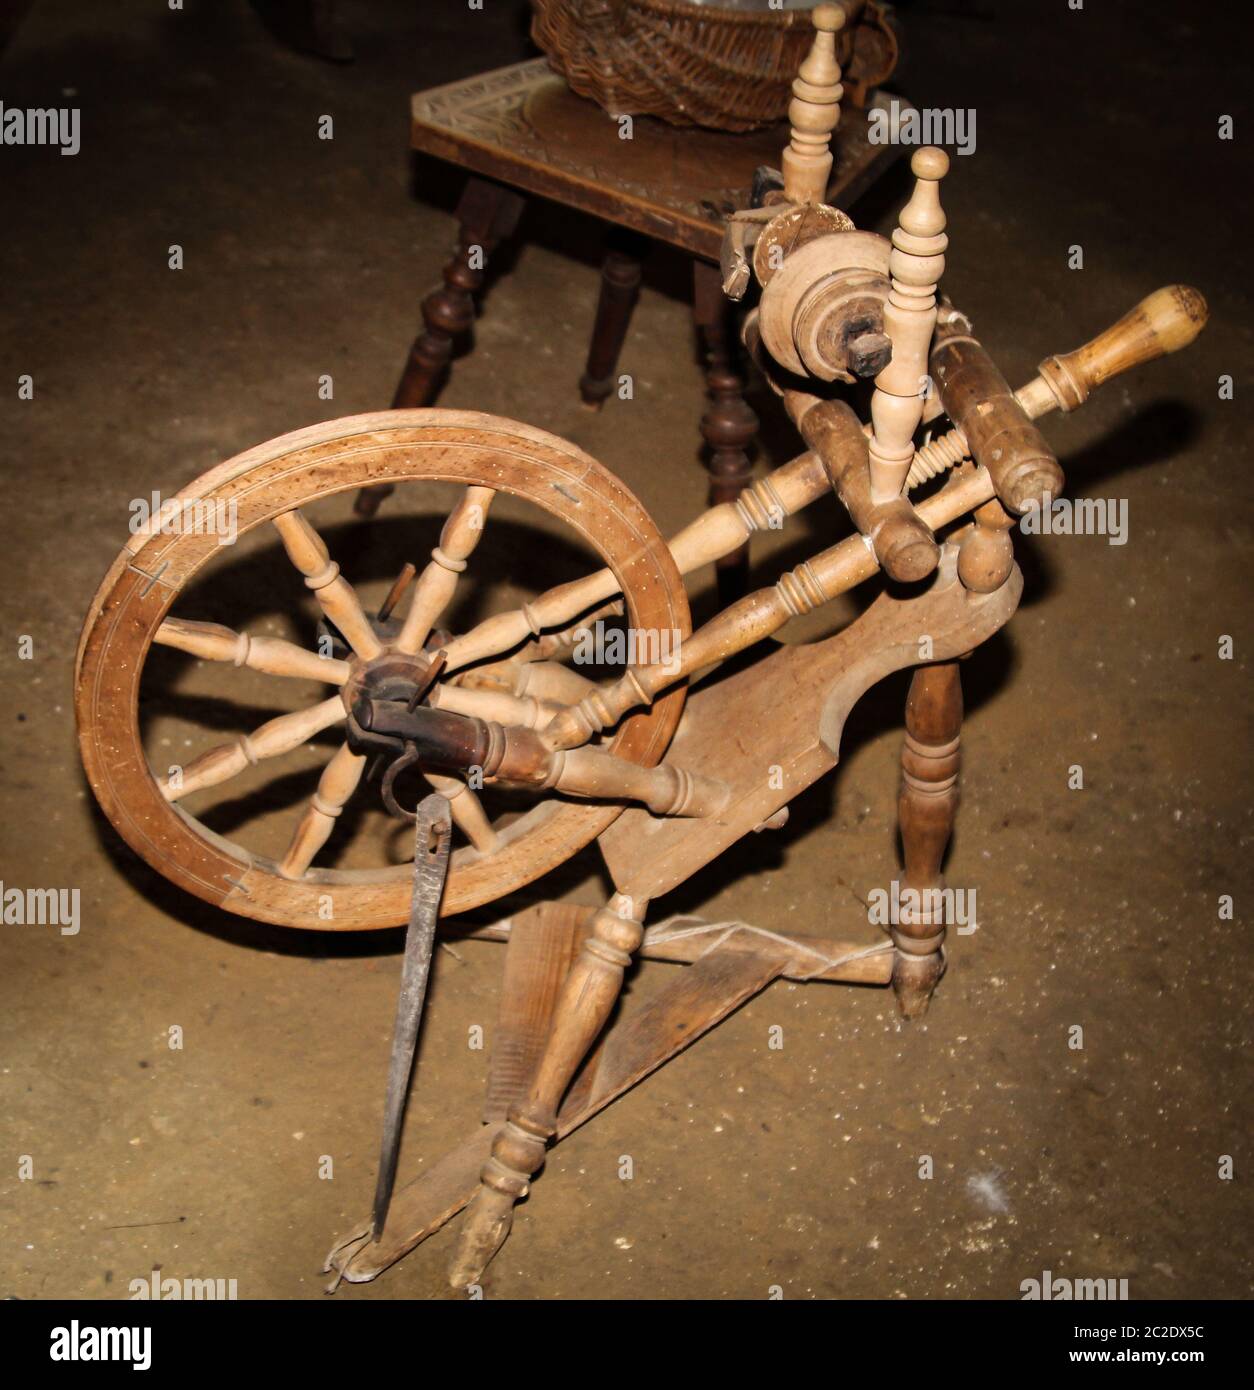 An old wooden spinning wheel was spun on the wool Stock Photo